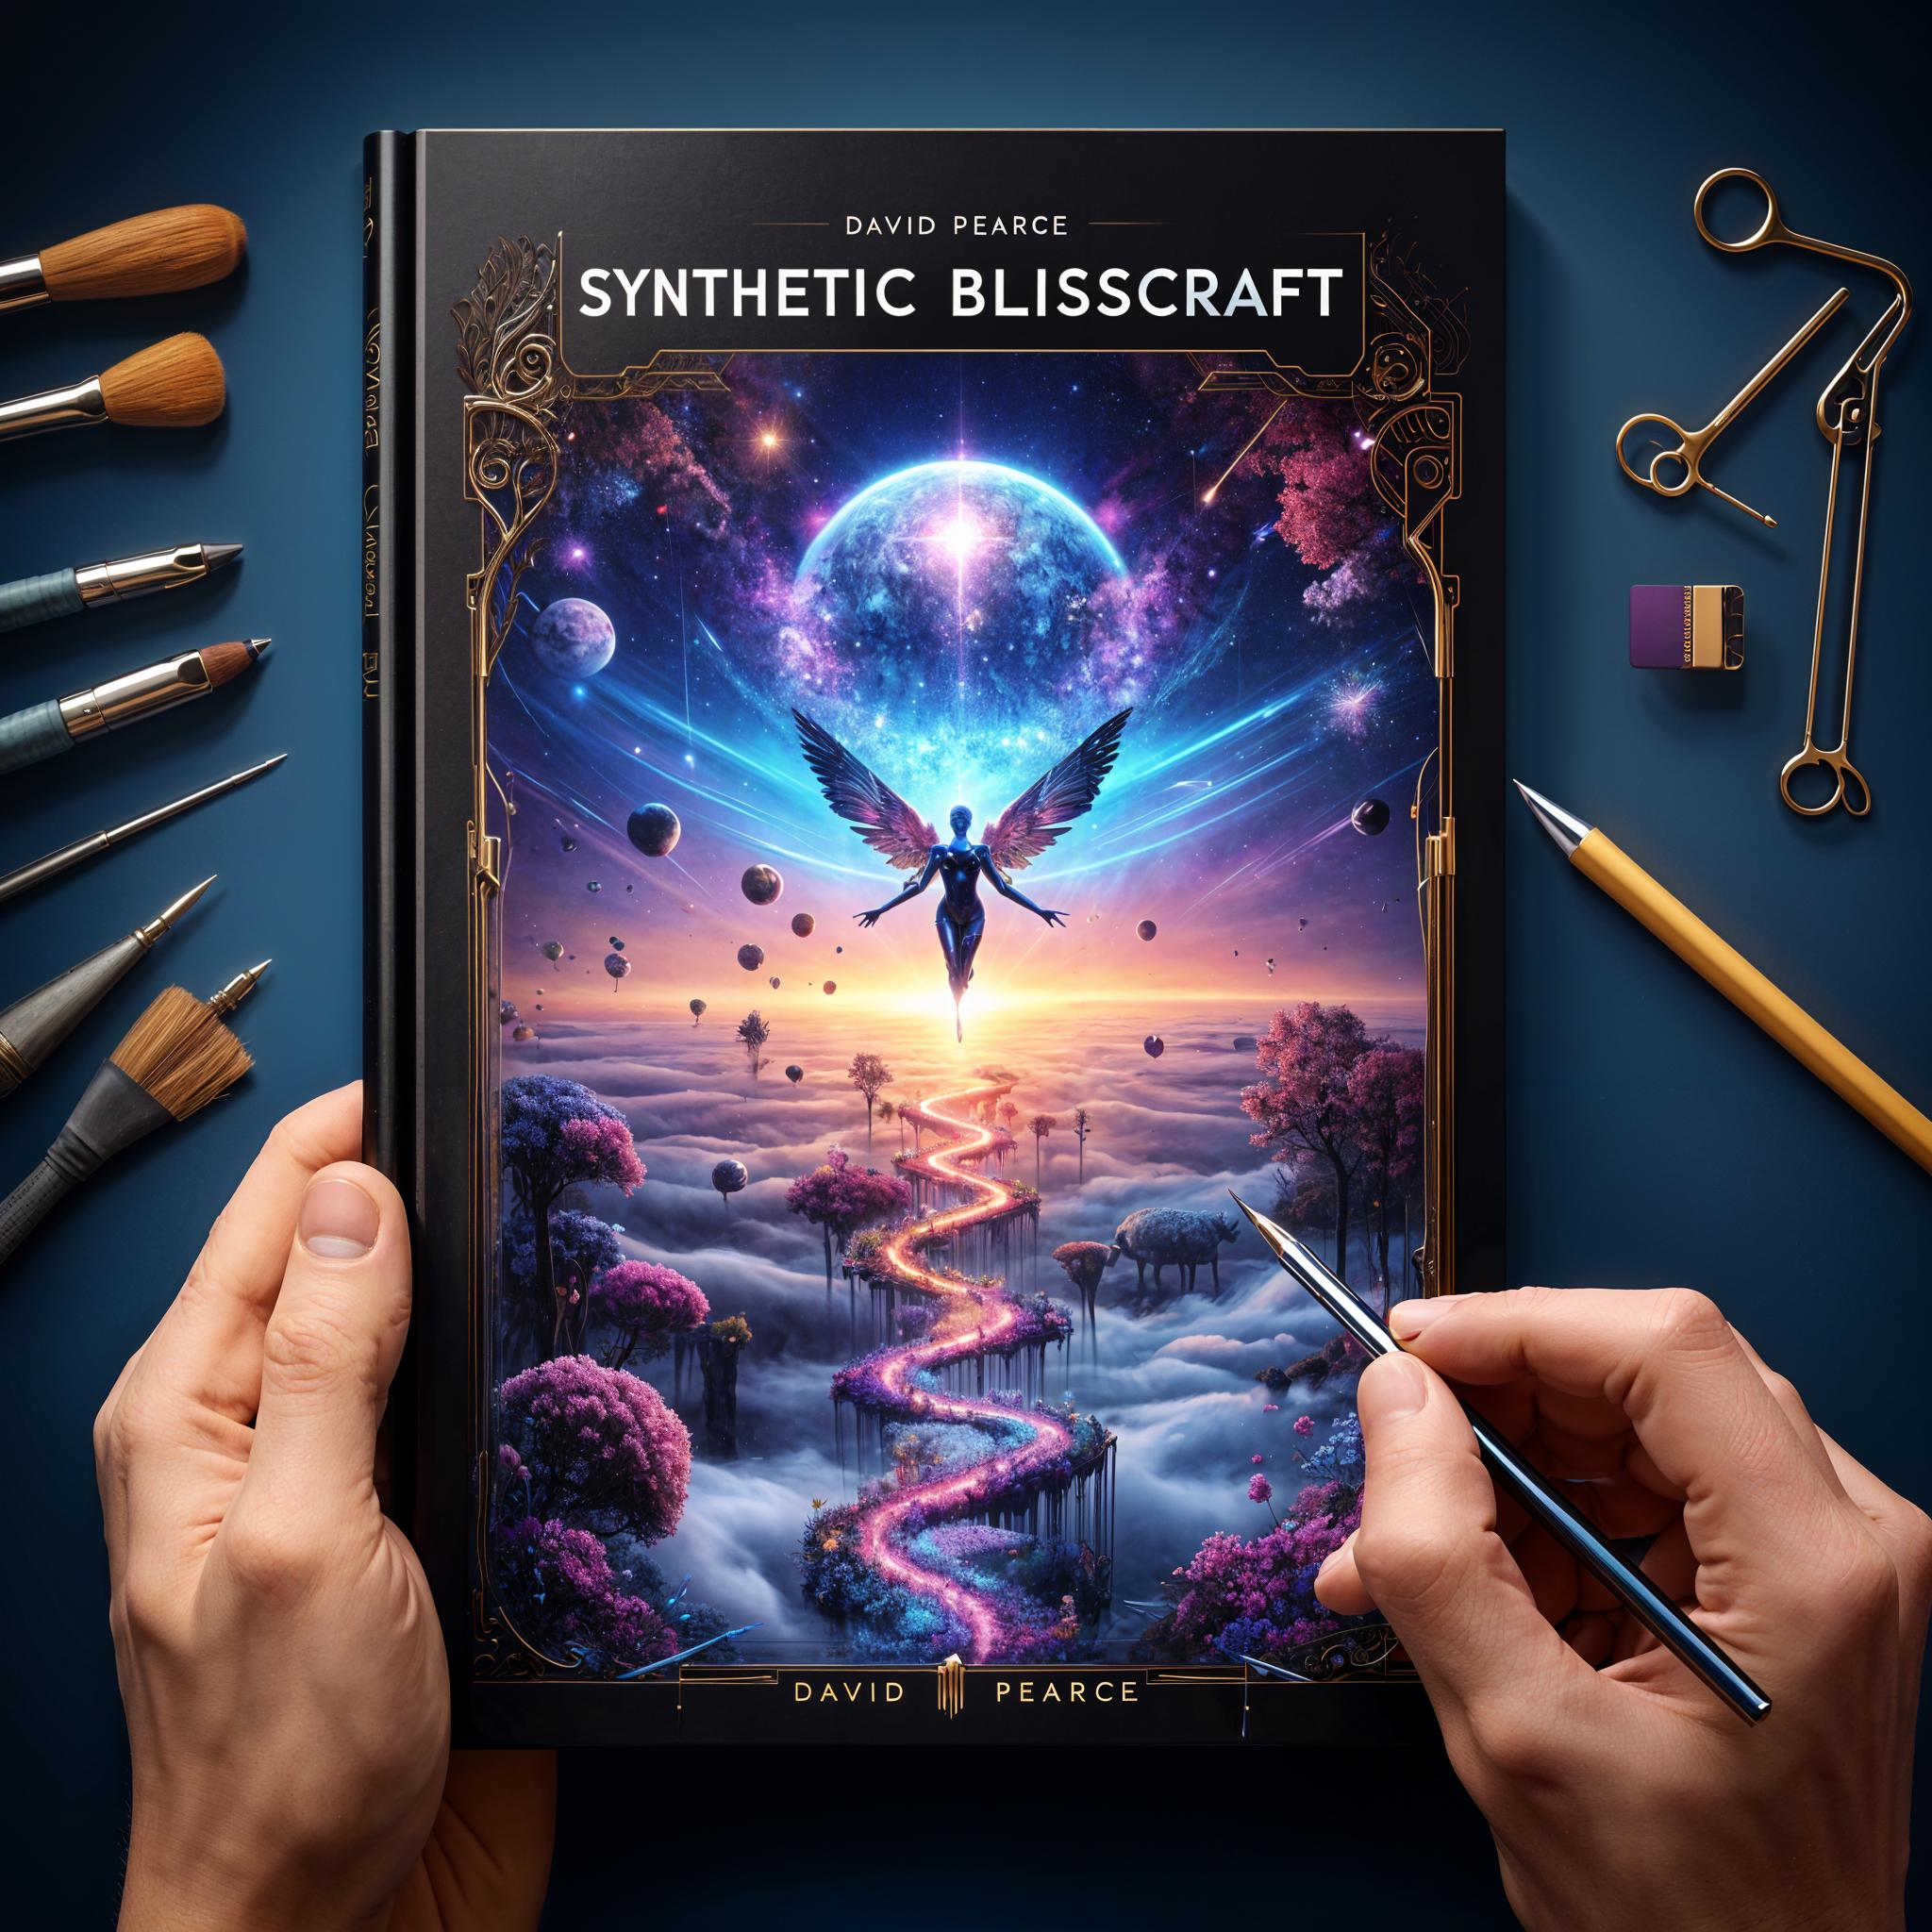 Synthetic Blisscraft by David Pearce